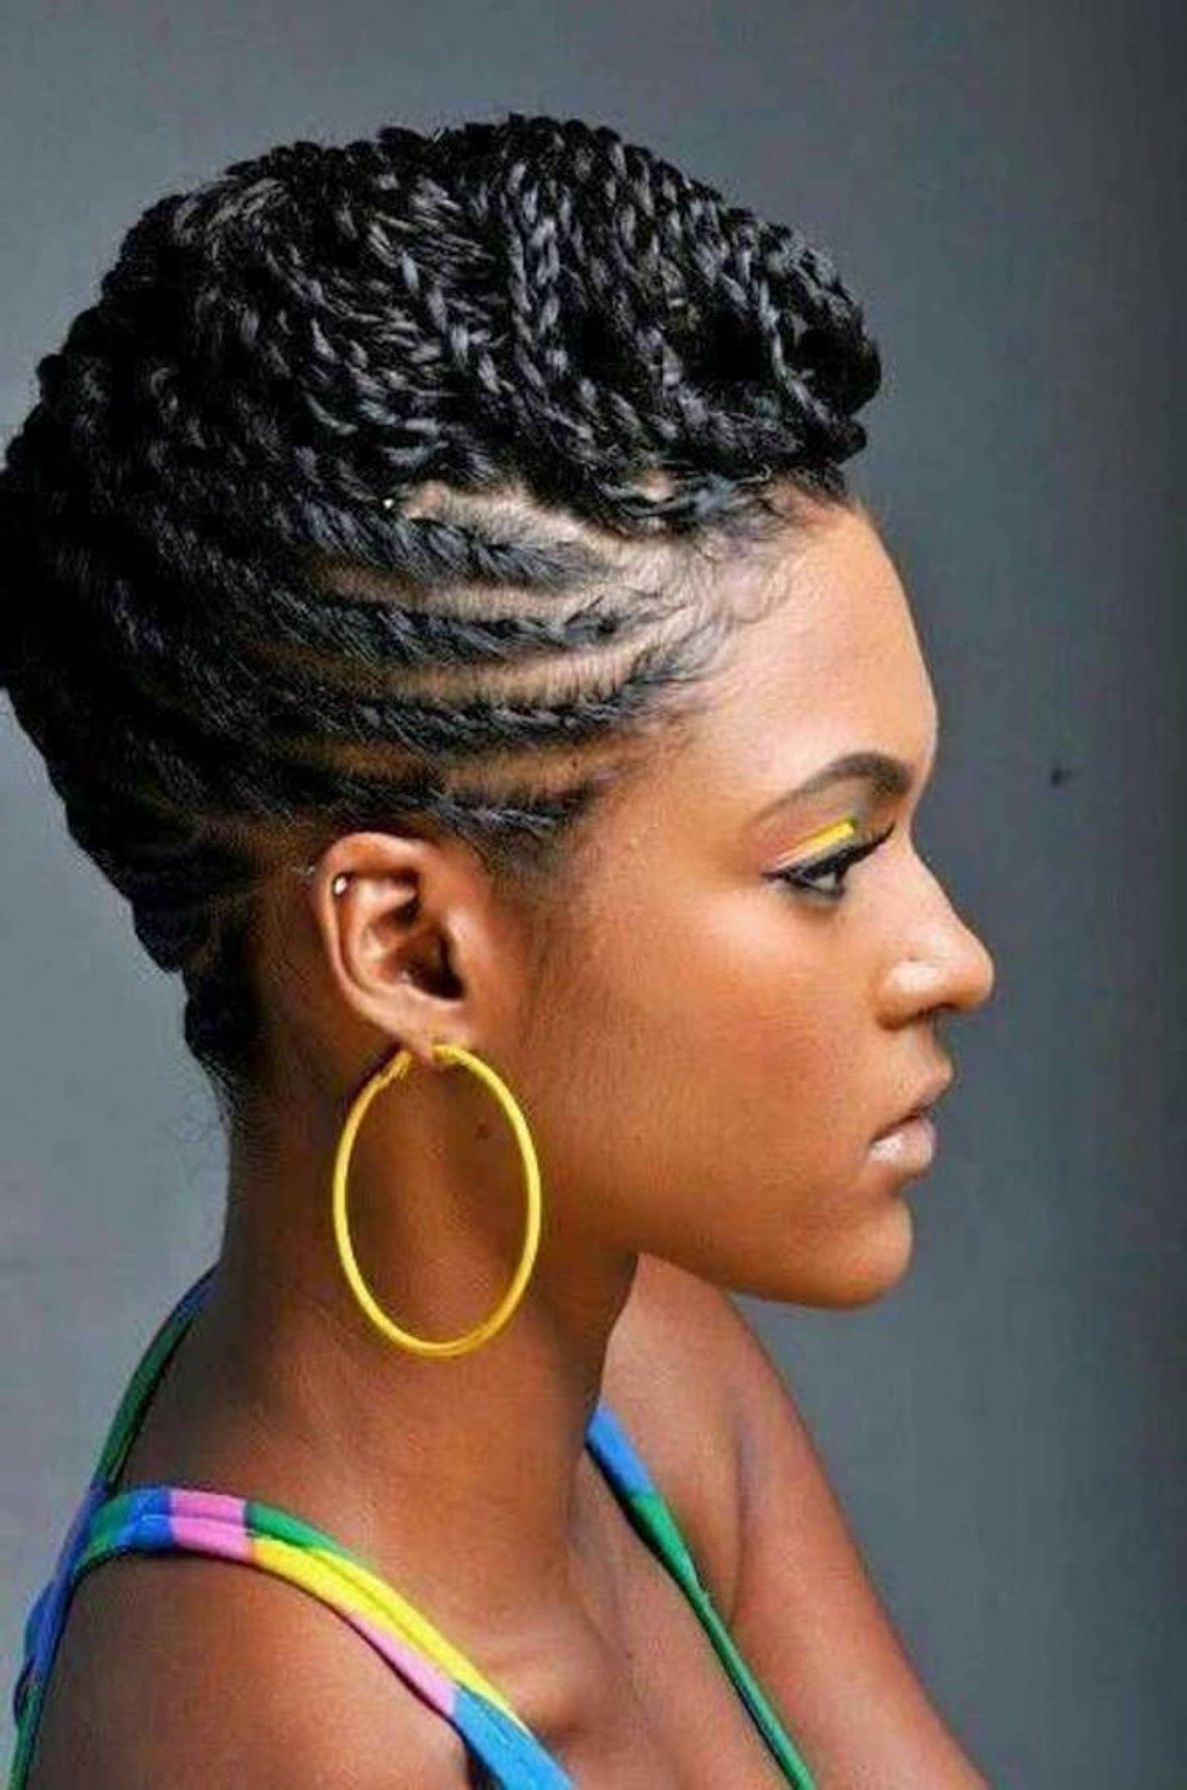 25 Updo Hairstyles For Black Women Throughout Short Braided Pertaining To Updo Braid Hairstyles (View 12 of 15)